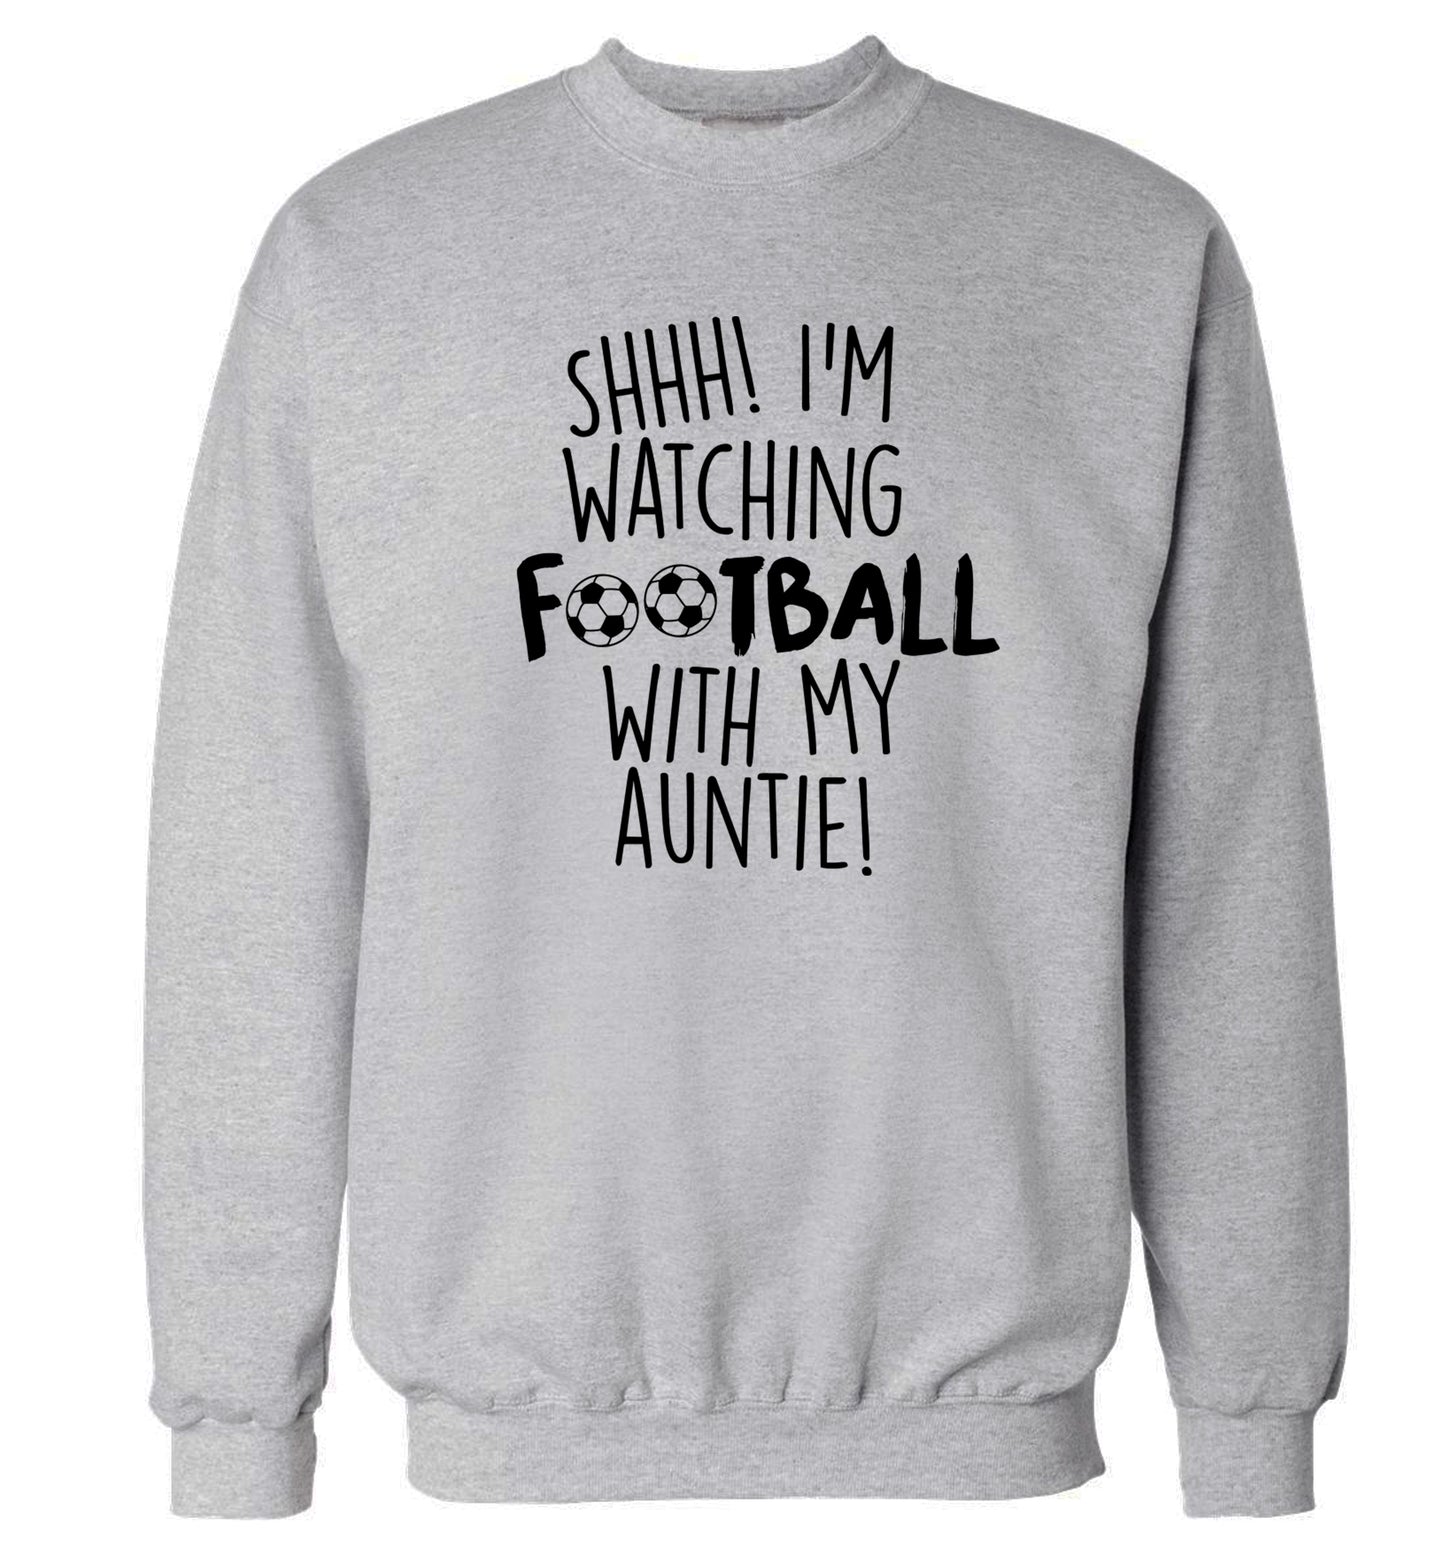 Shhh I'm watching football with my auntie Adult's unisexgrey Sweater 2XL